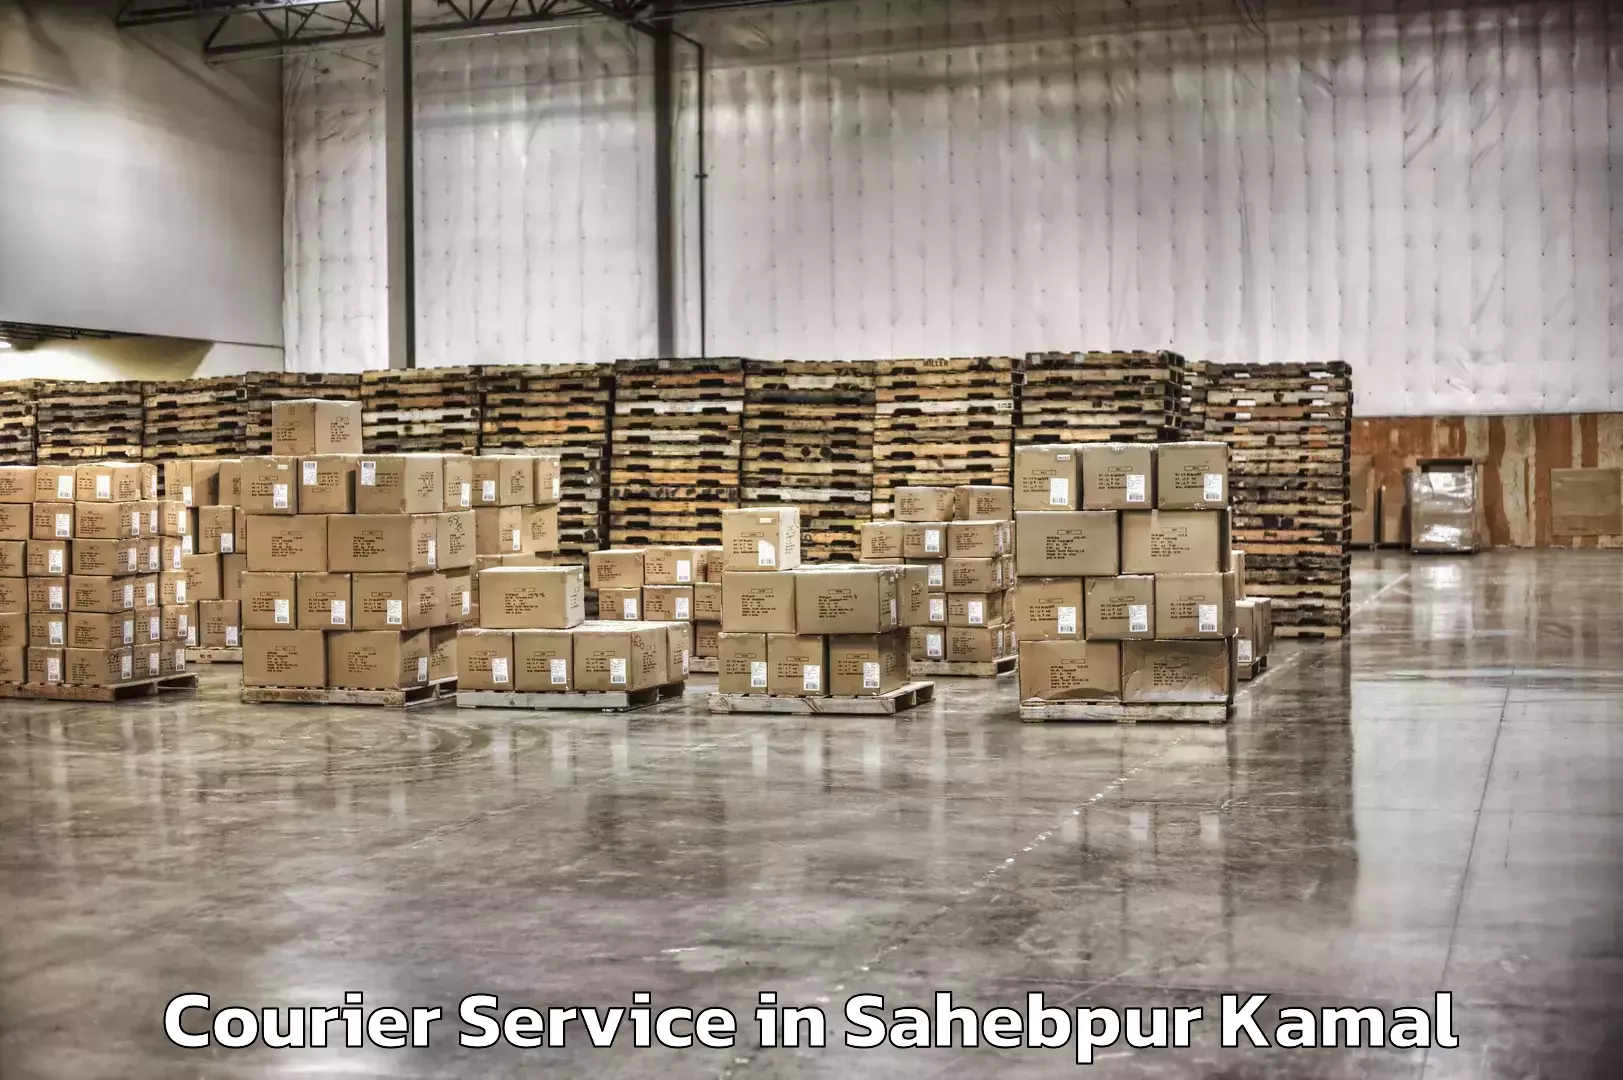 Customer-friendly courier services in Sahebpur Kamal